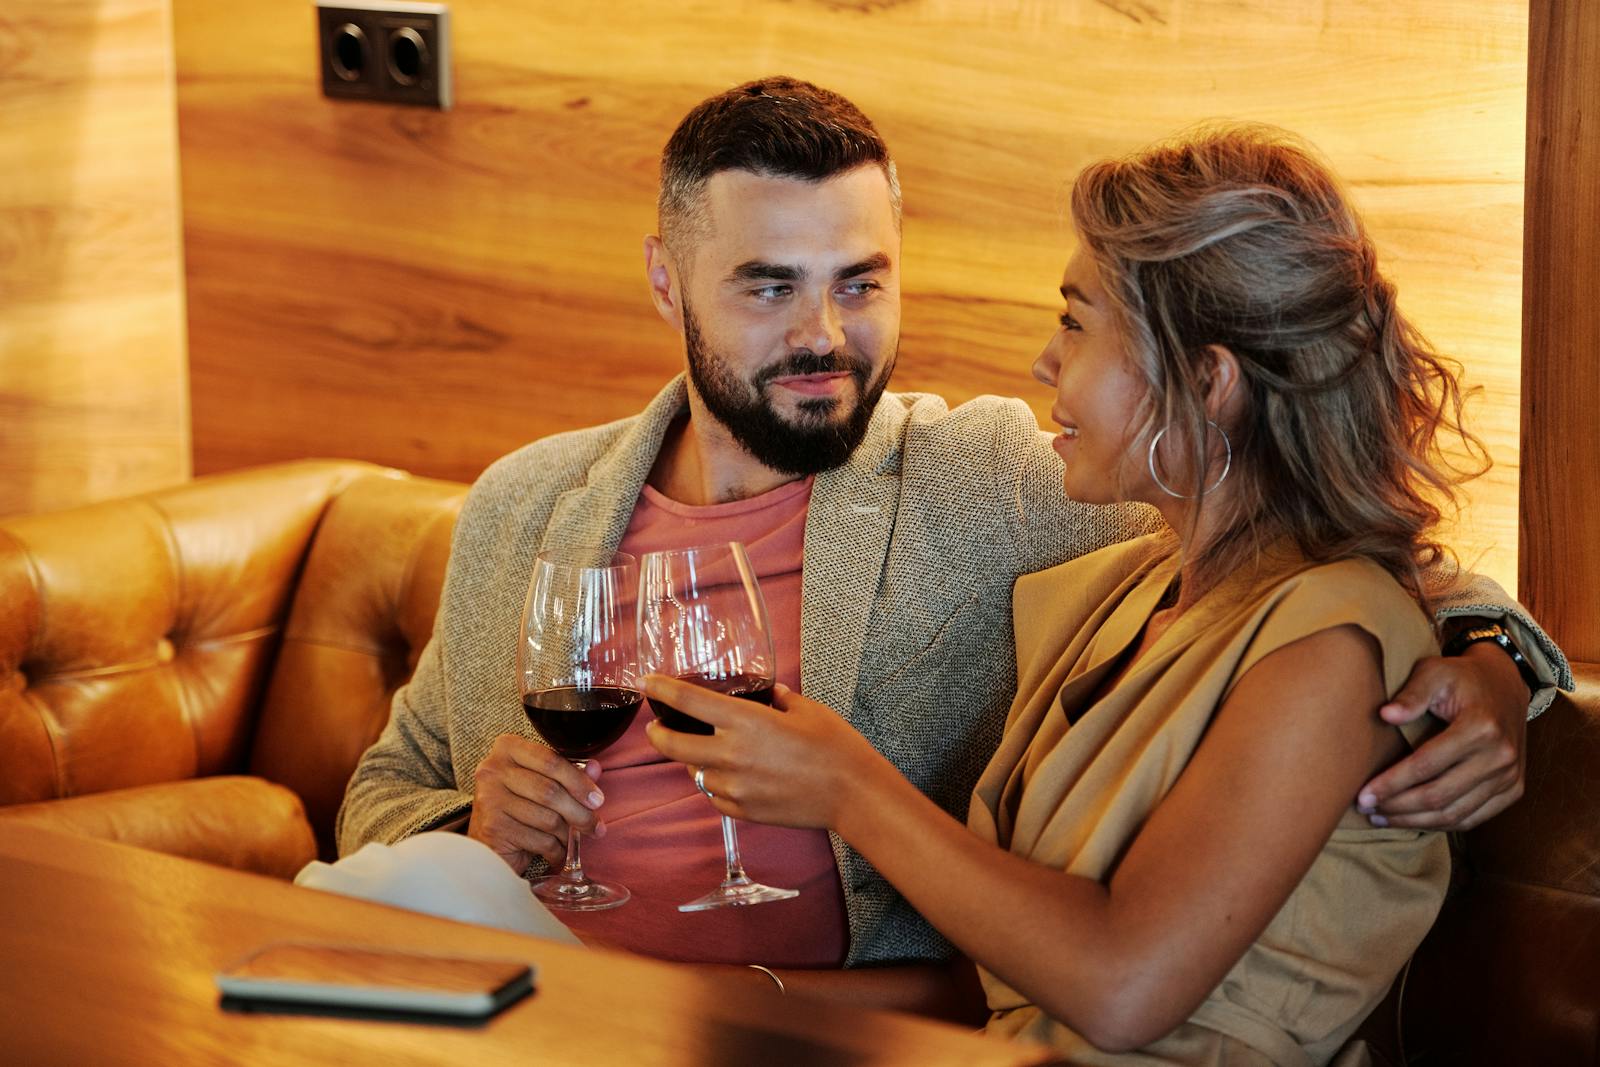 Couple Sitting Together in a Restaurant Holding Wine Glasses